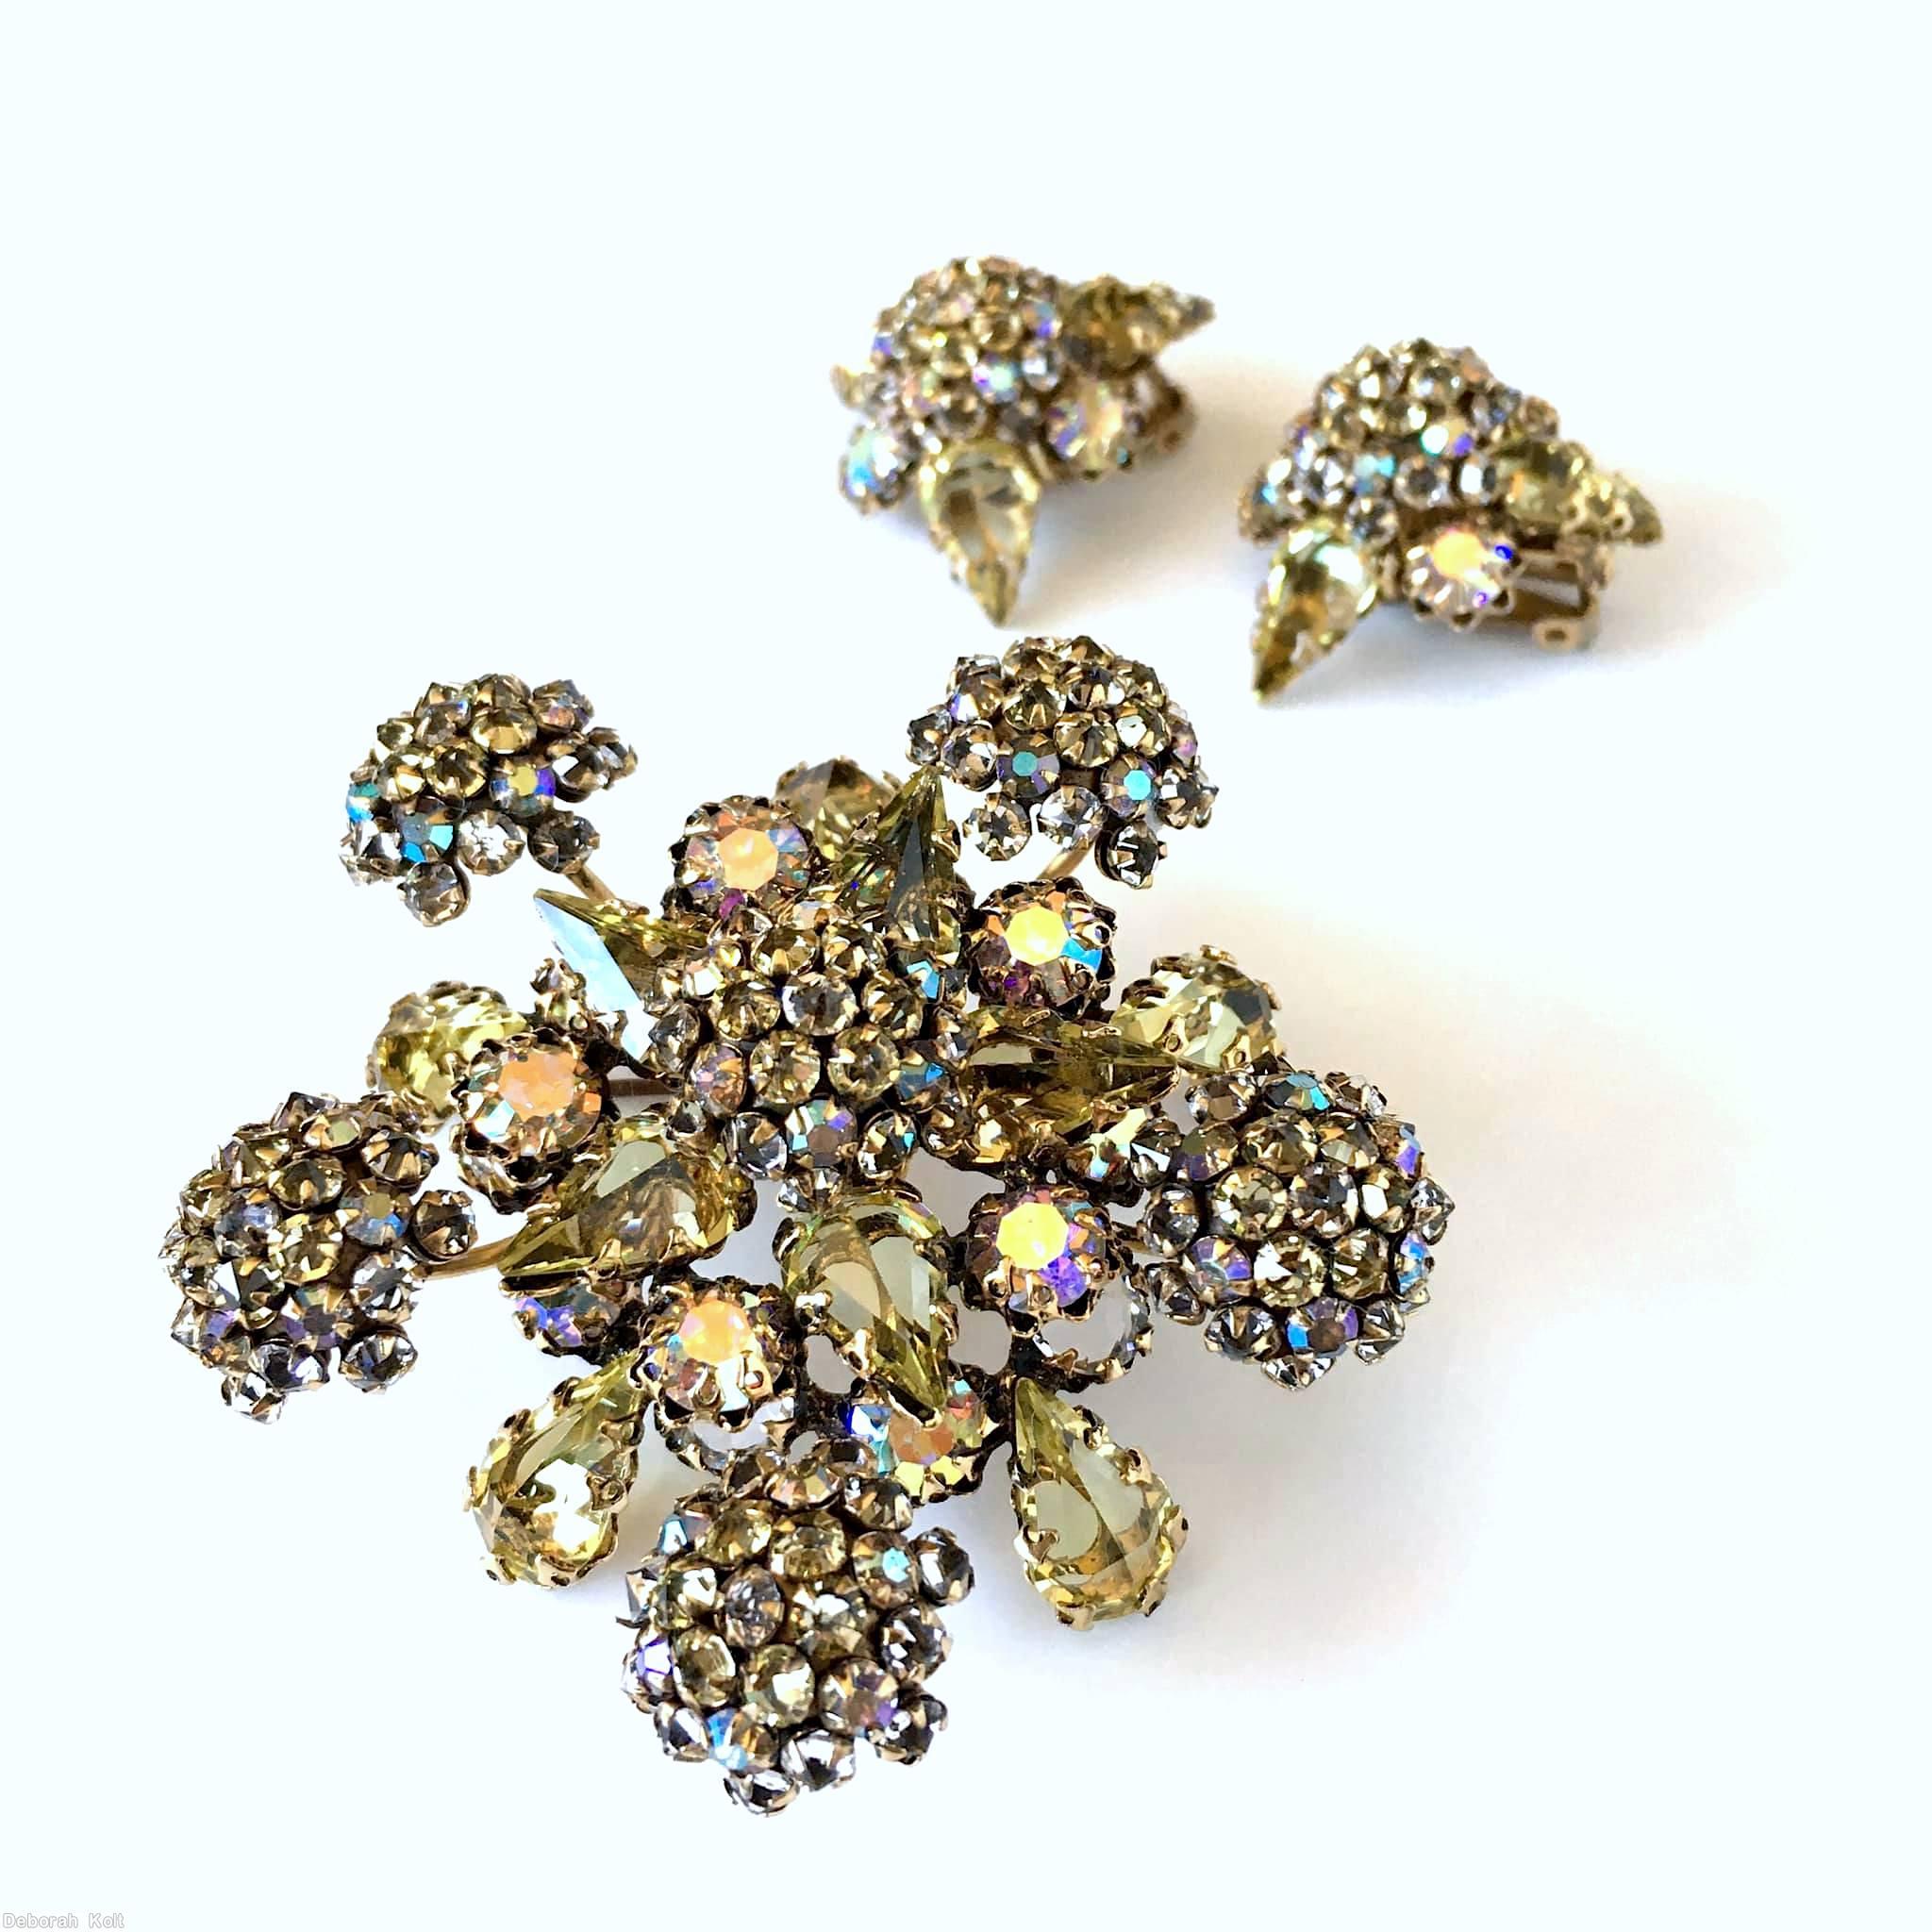 Schreiner 5 pointy star shaped domed radial 2 level pin 6 clustered ball clustered ball center 10 teardrop clear champagne ab goldtone jewelry